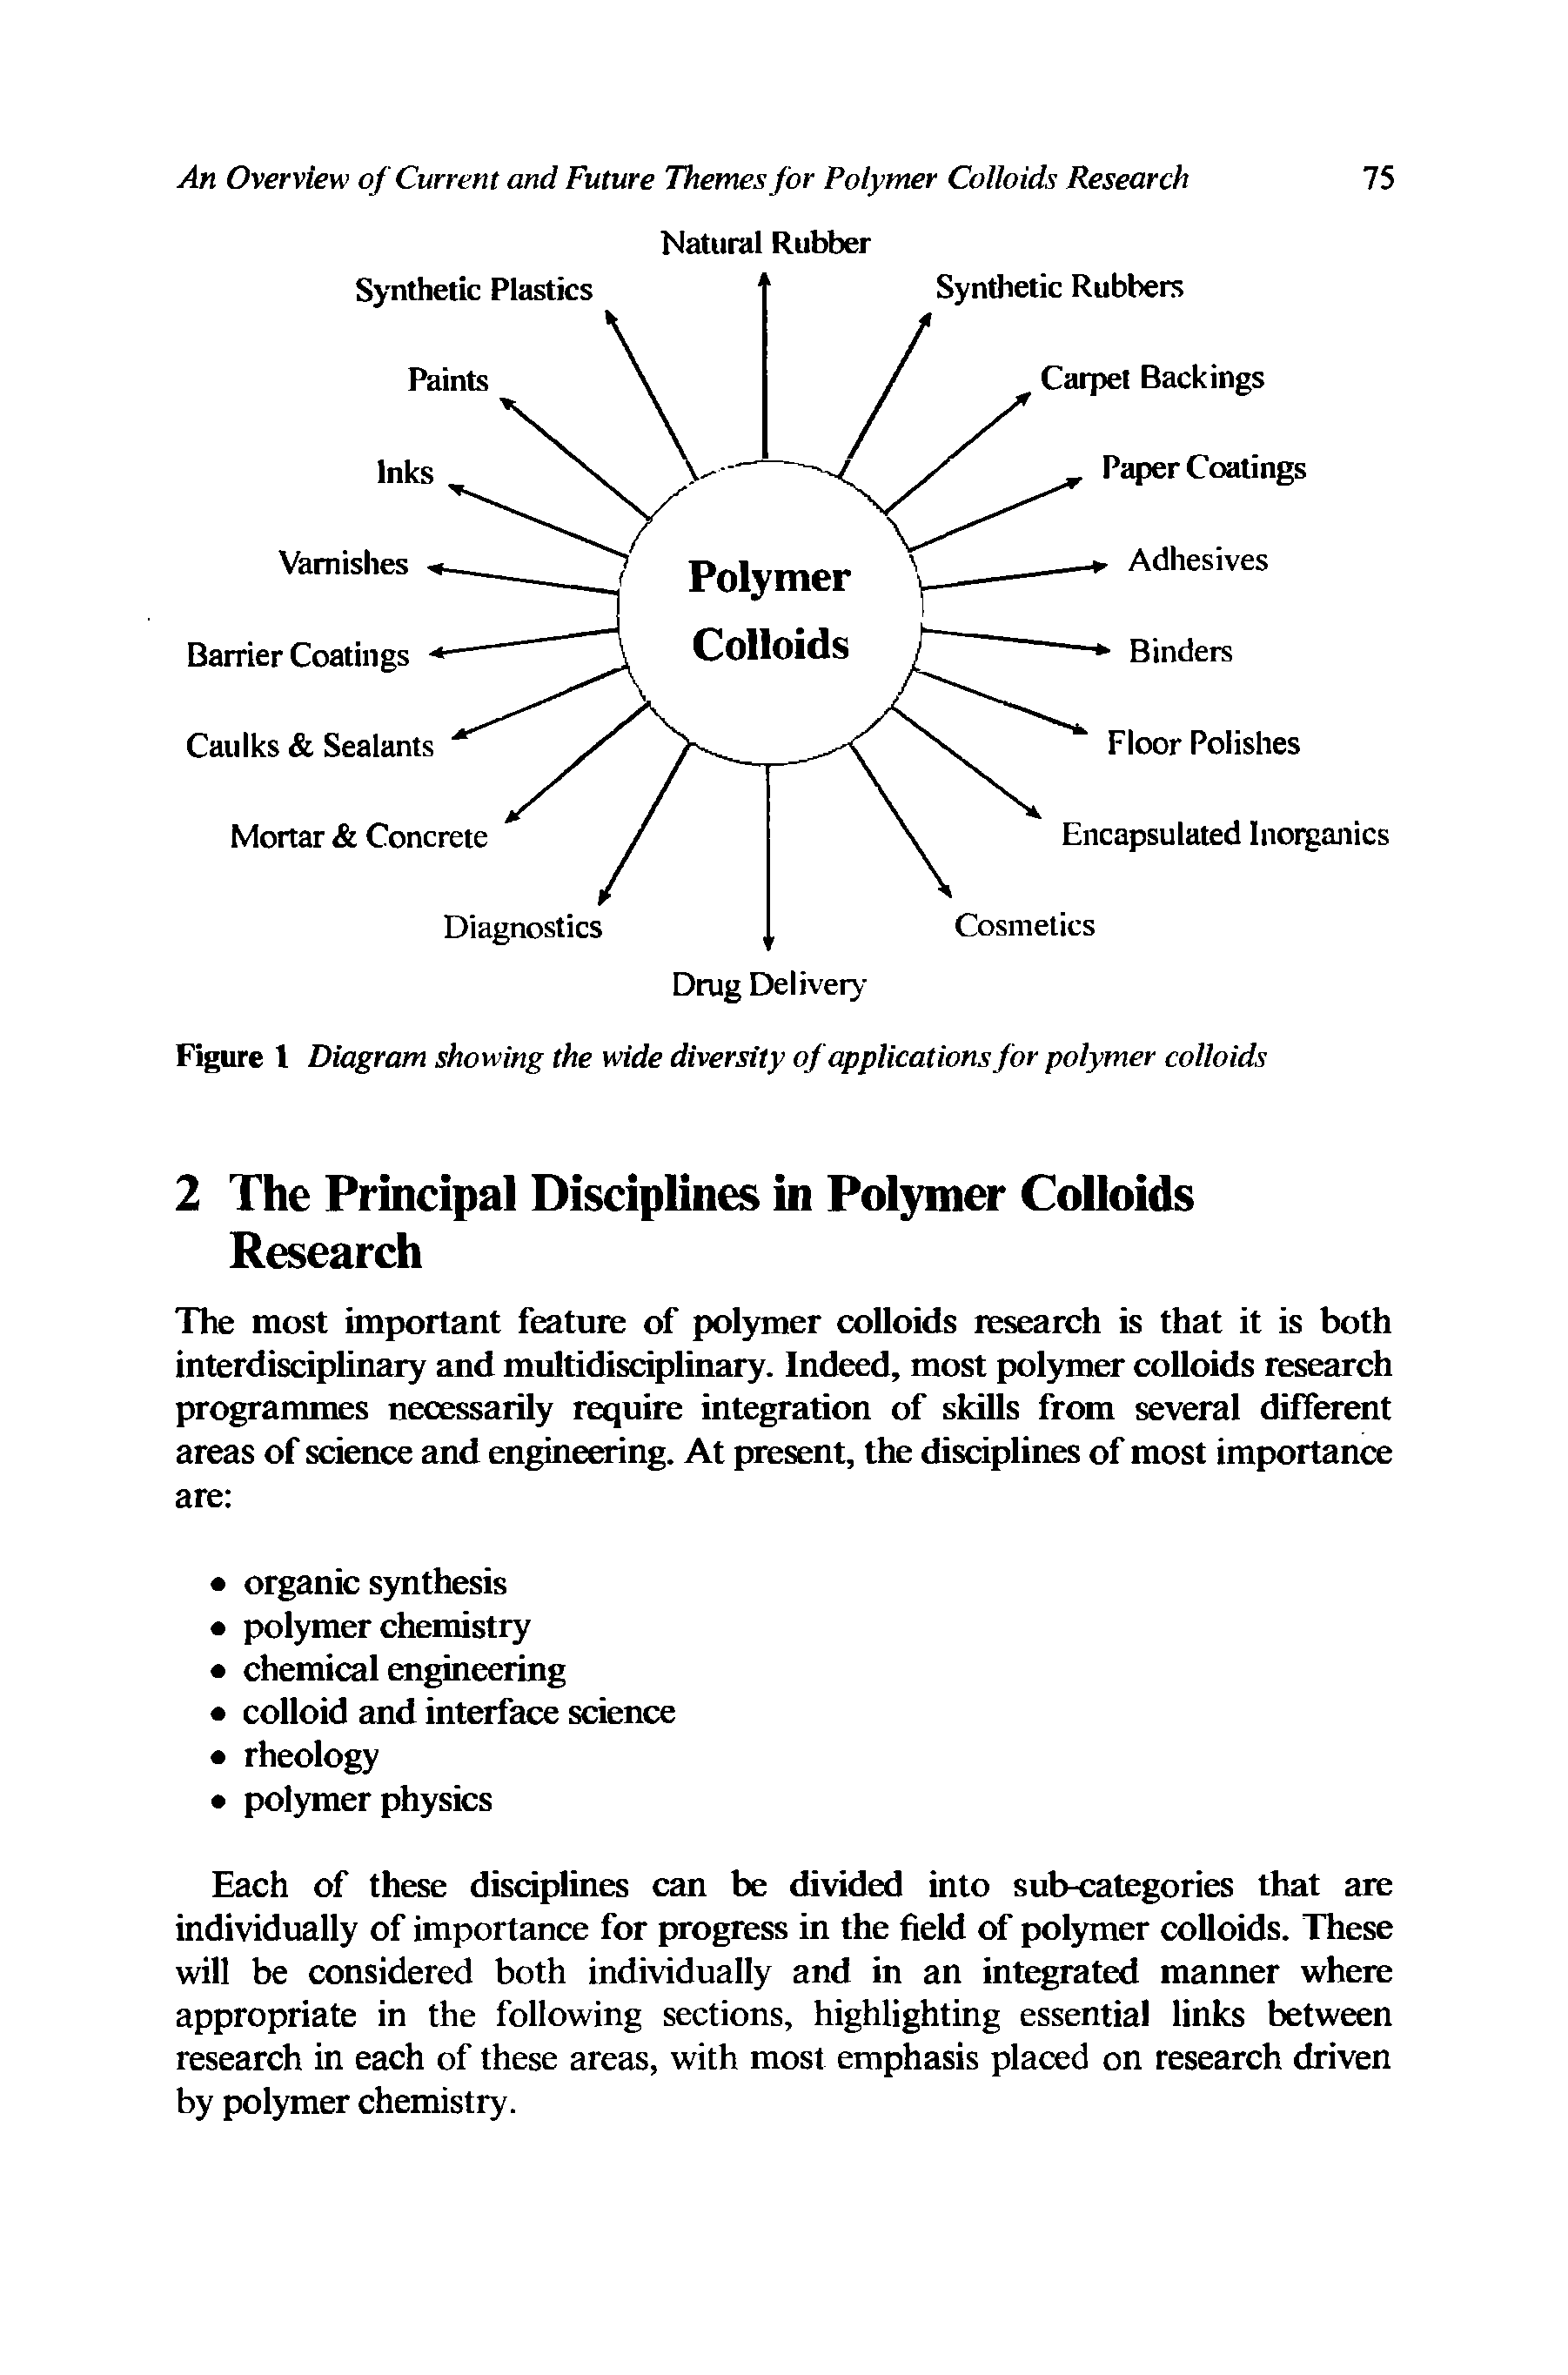 Figure 1 Diagram showing the wide diversity of applications for polymer colloids...